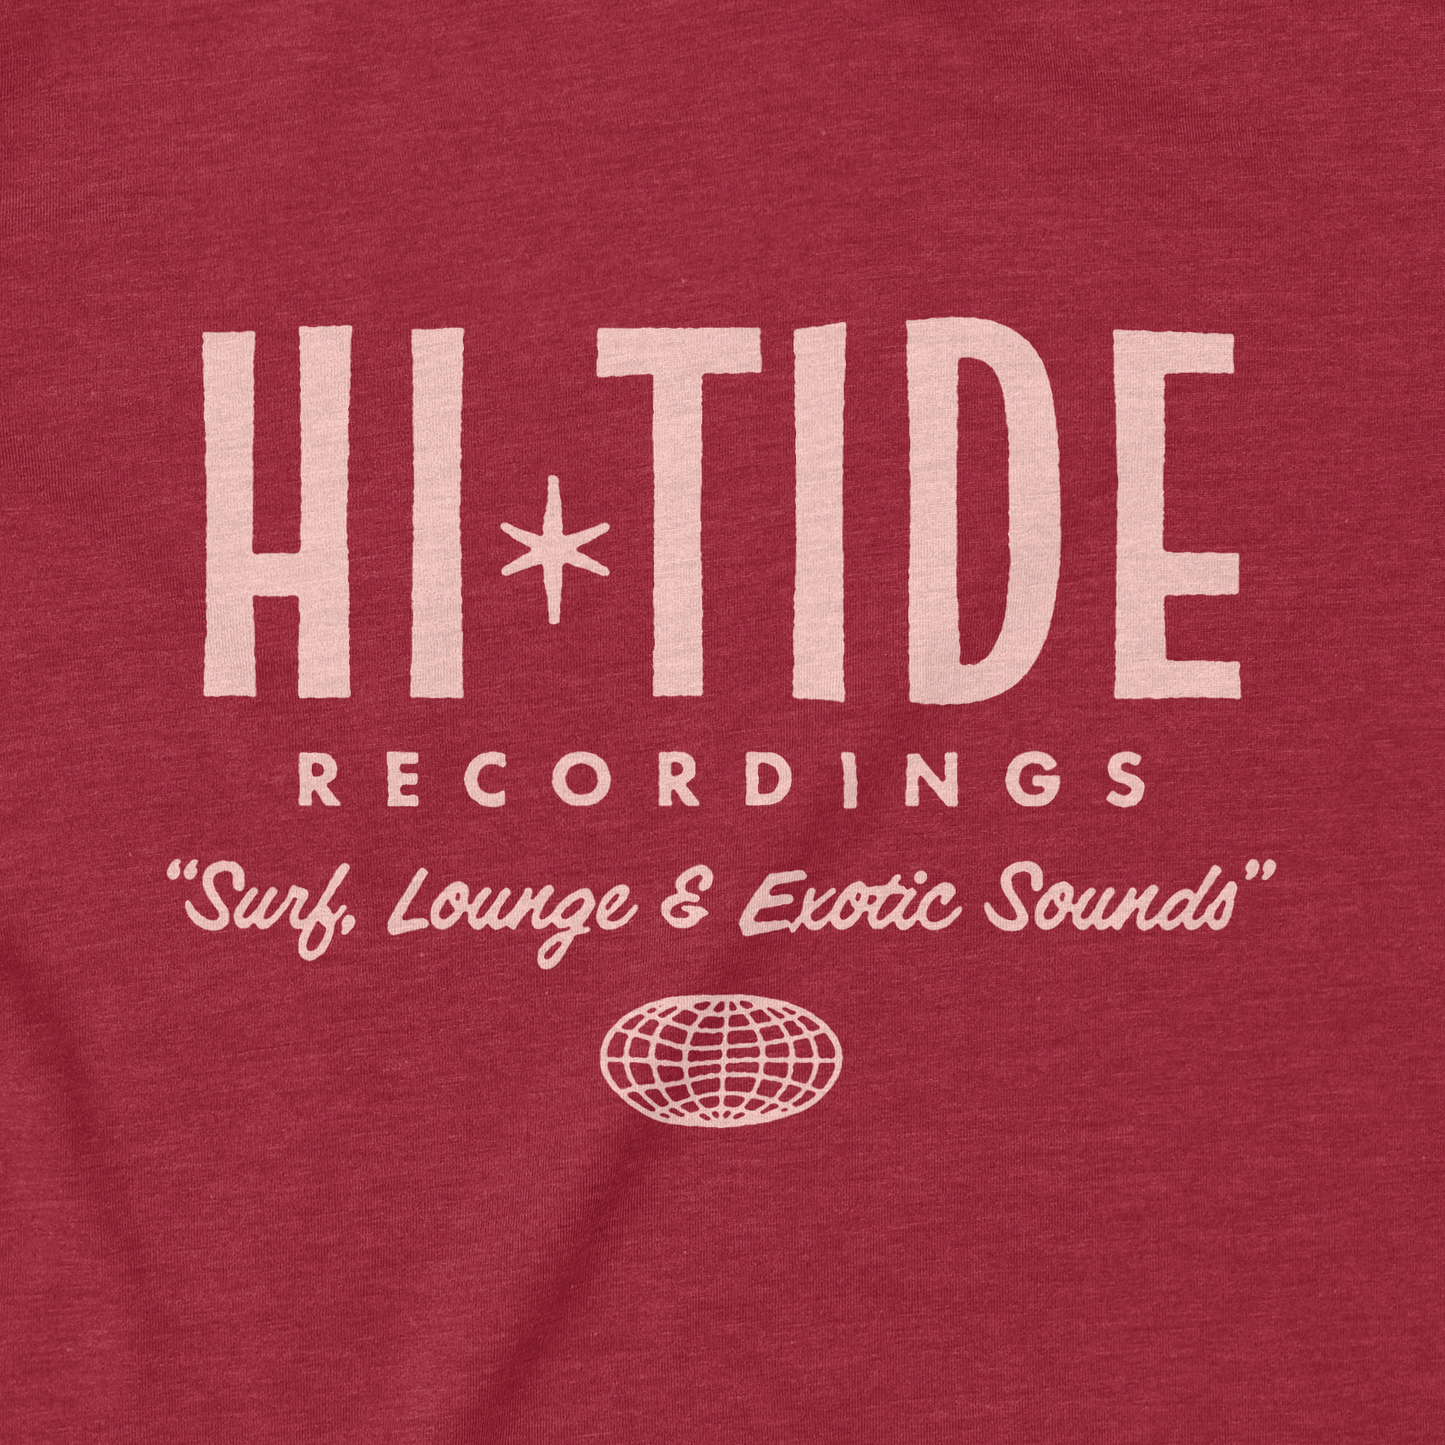 Surf, Lounge & Exotic Sounds "Ruby-Tone" T